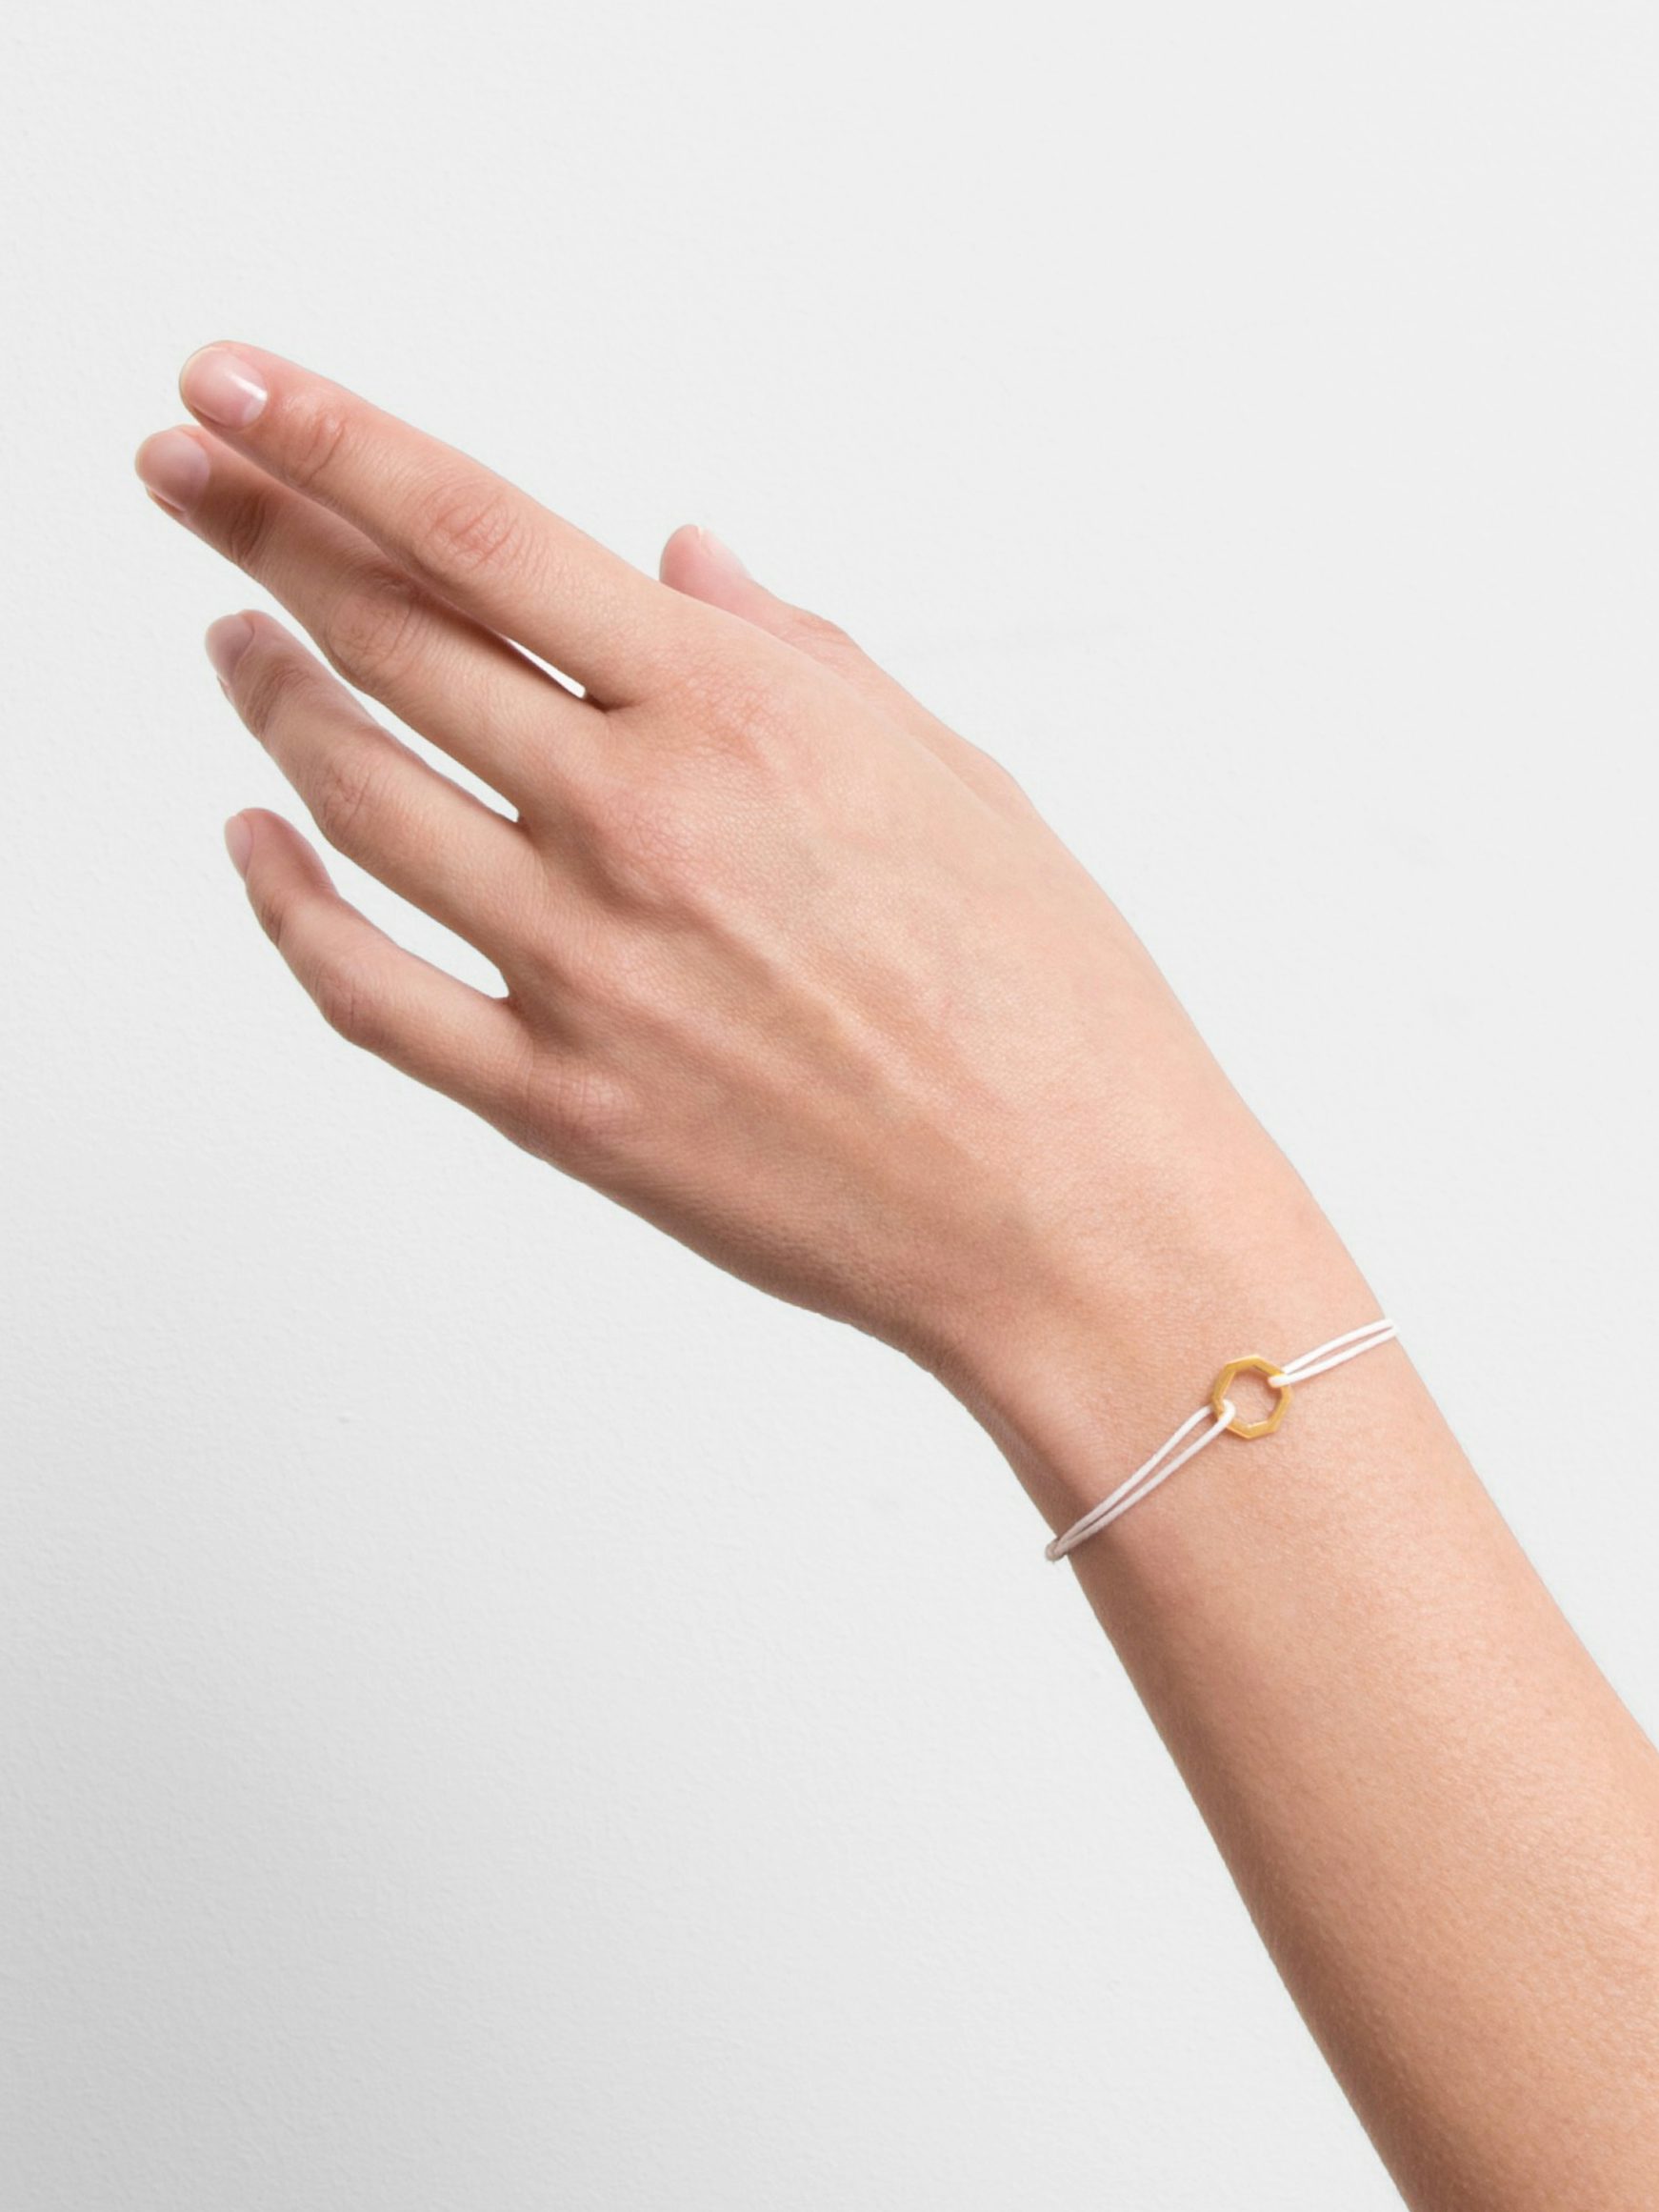 Octogone motif in 18k Fairmined ethical yellow gold, on a bright orange cord.